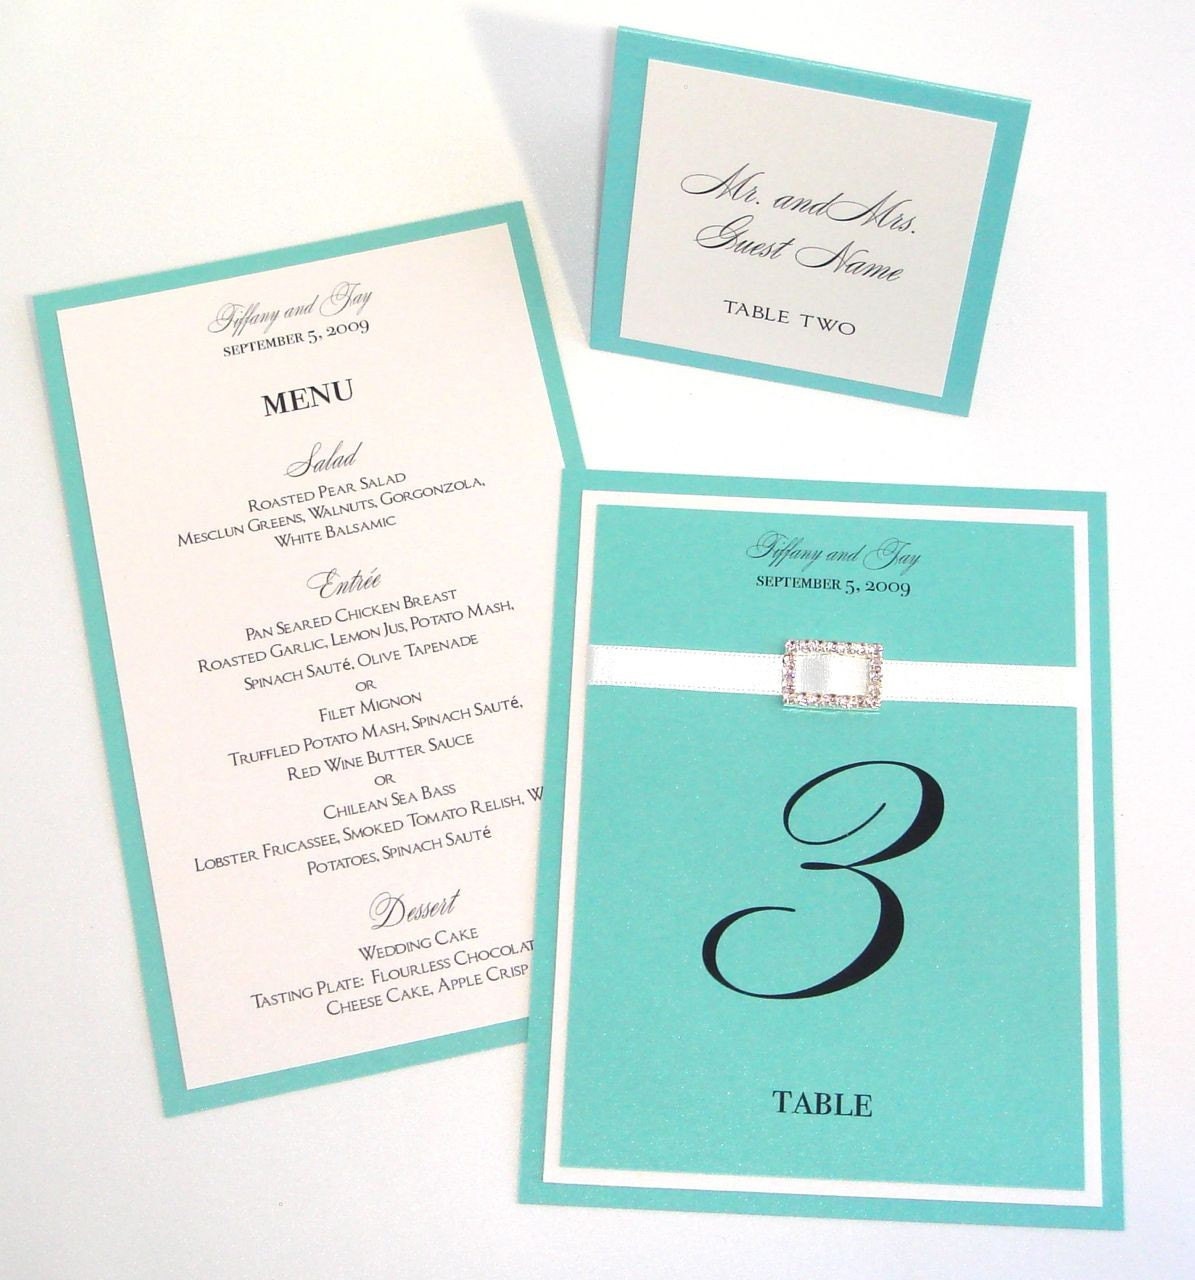 Let 39s See Those Menu Cards and or Programs wedding reception menu cards